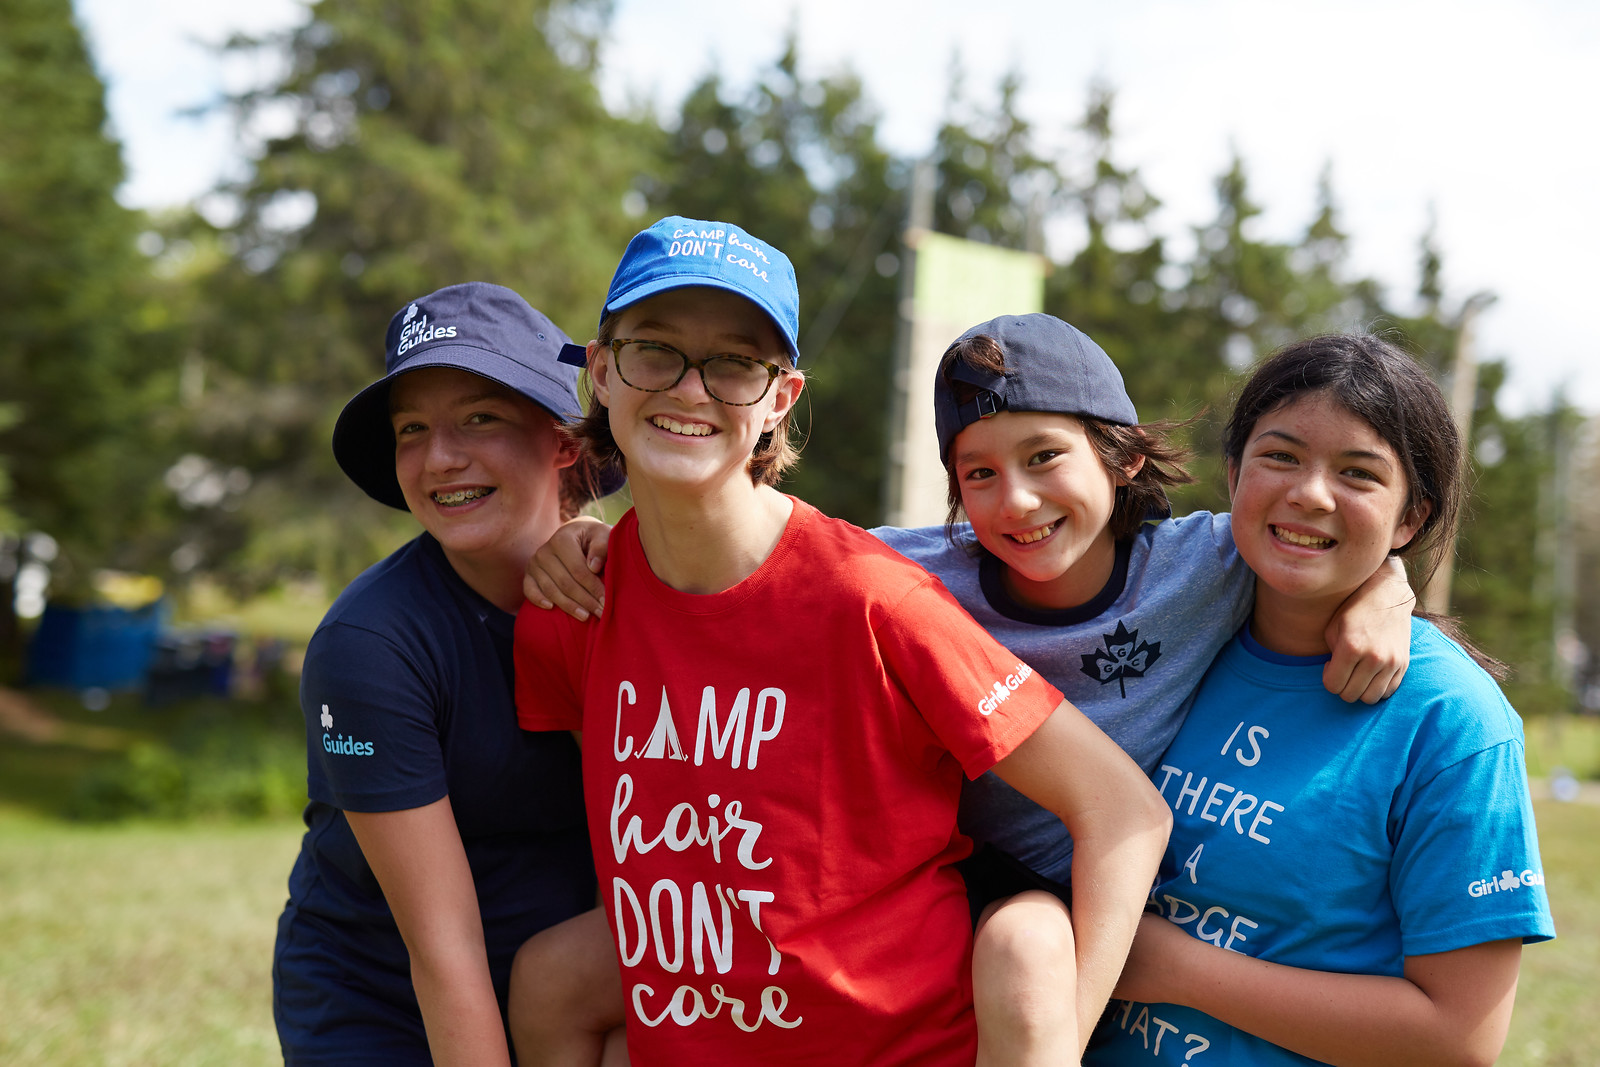 Four Girl Guides aged 9 to 11 posing together outside at summer camp. Three of the girls are lifting the fourth one on their back and shoulders.